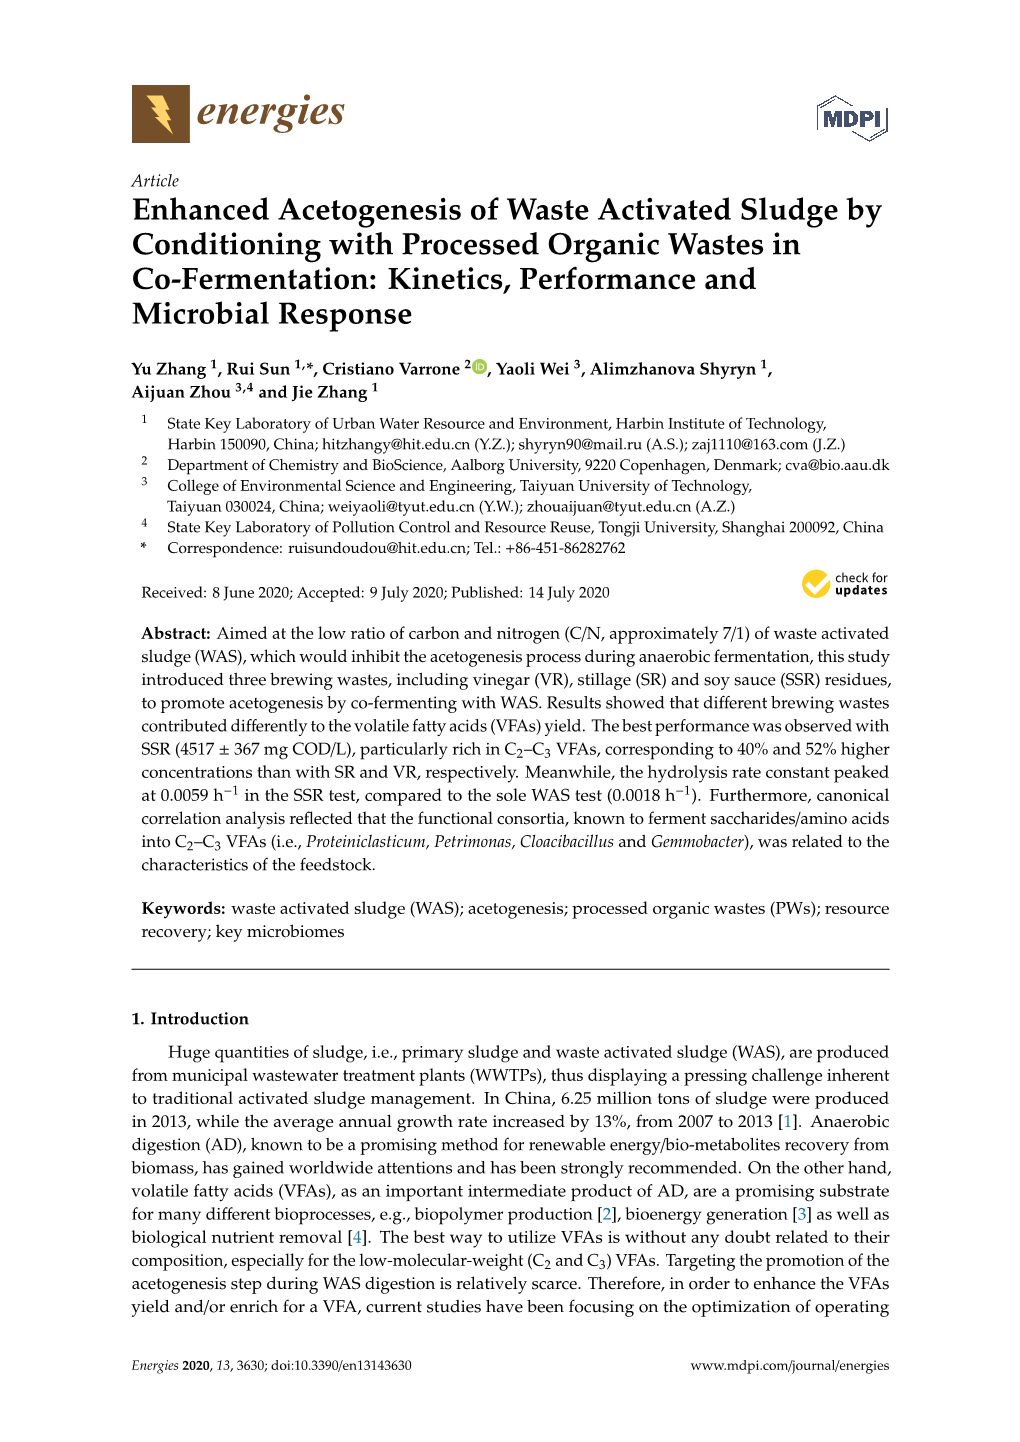 Enhanced Acetogenesis of Waste Activated Sludge by Conditioning with Processed Organic Wastes in Co-Fermentation: Kinetics, Performance and Microbial Response